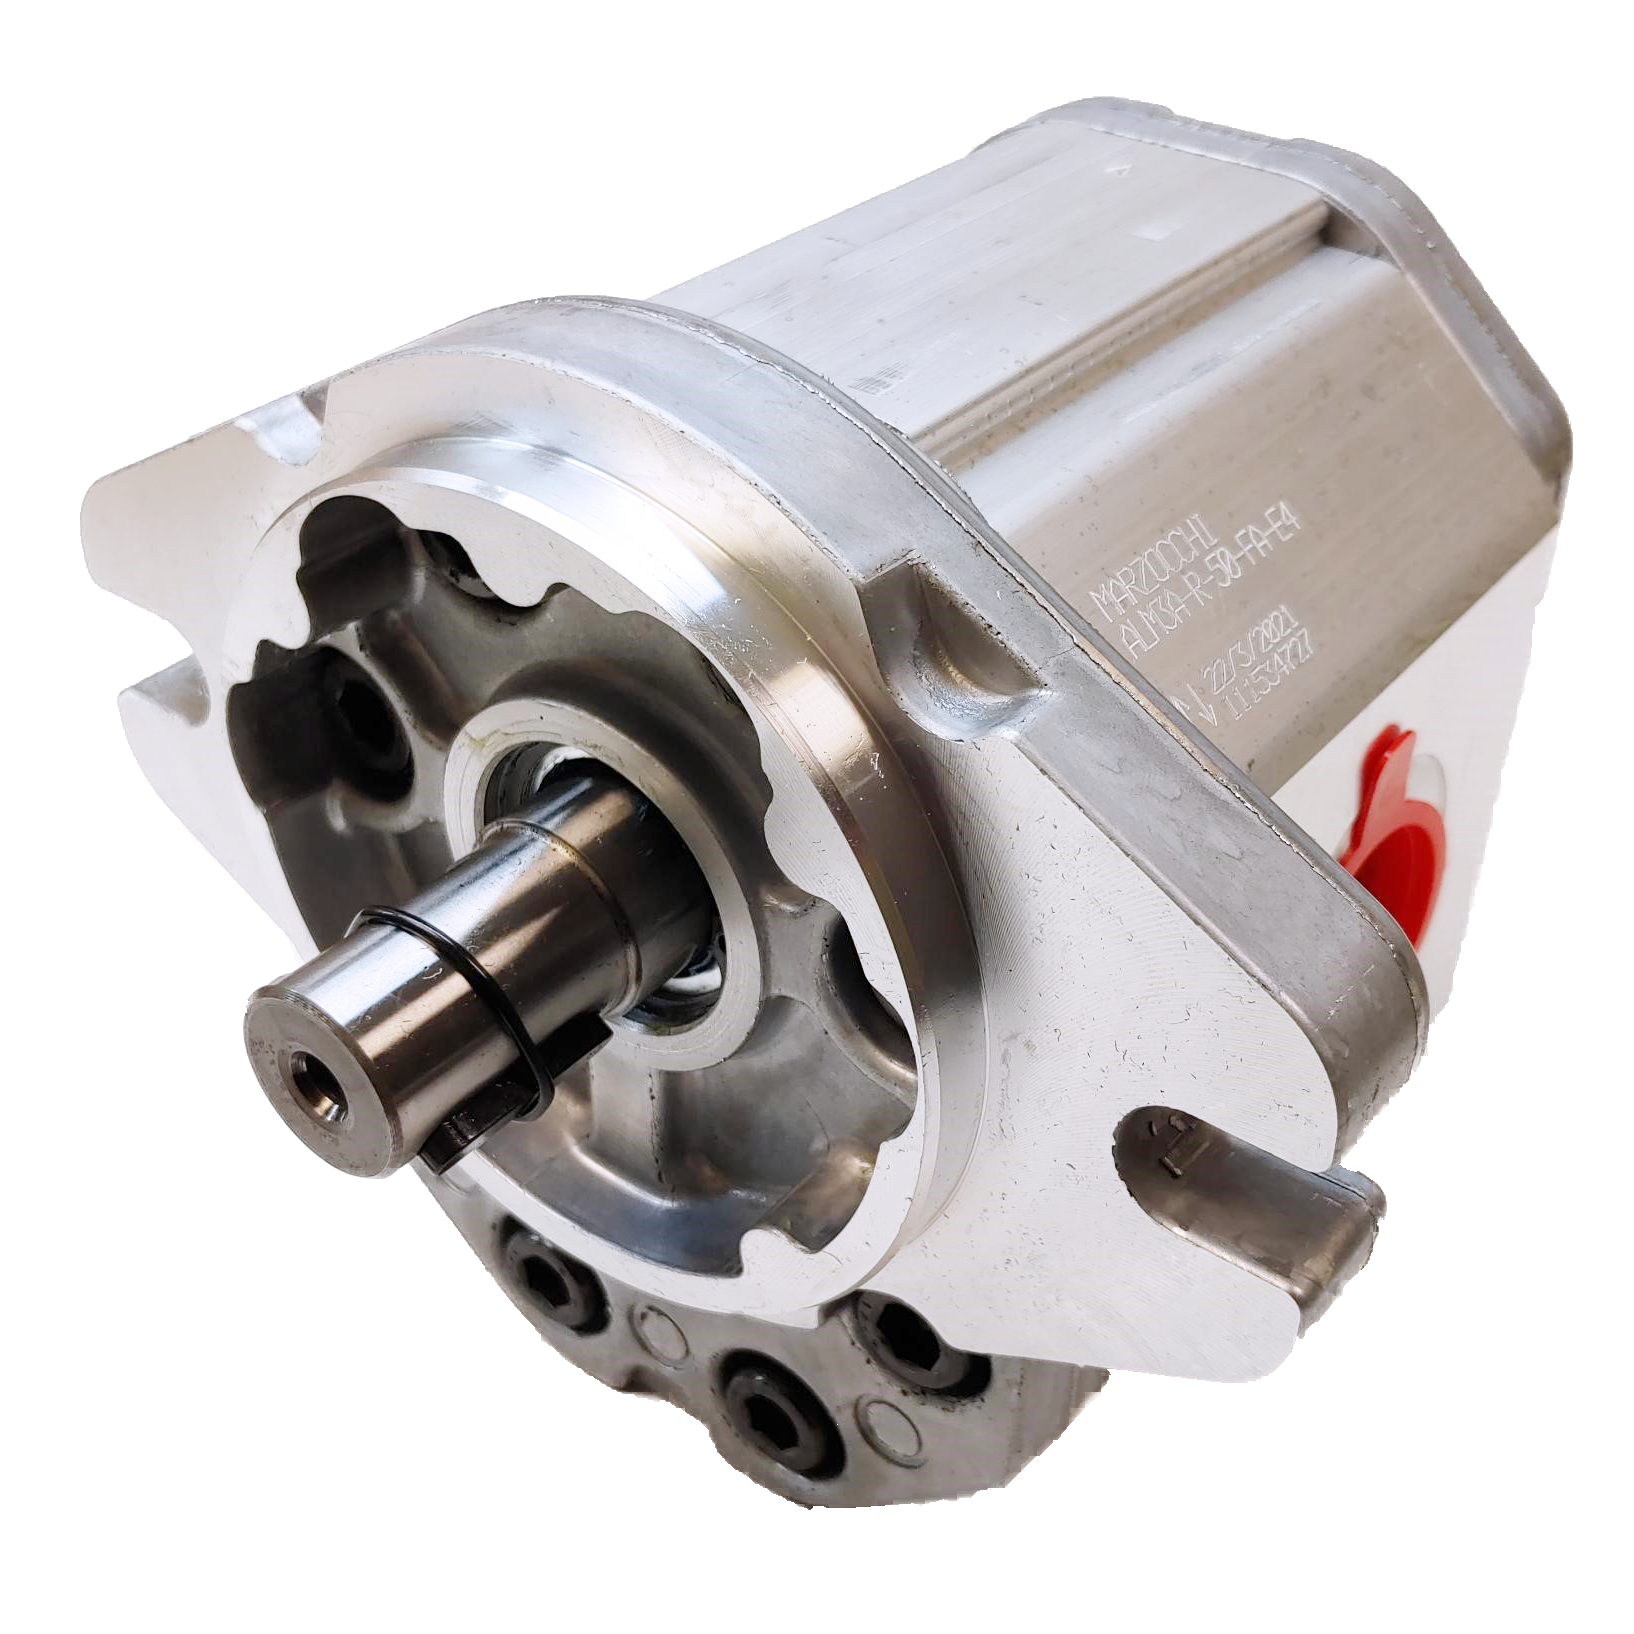 ALM3A-R-94-S1-E4 : Marzocchi Gear Motor, Bidirectional, 61cc, 2755psi rated, 2800RPM, 1.25" Code 61 ports, 9T 16/32DP Splined Shaft